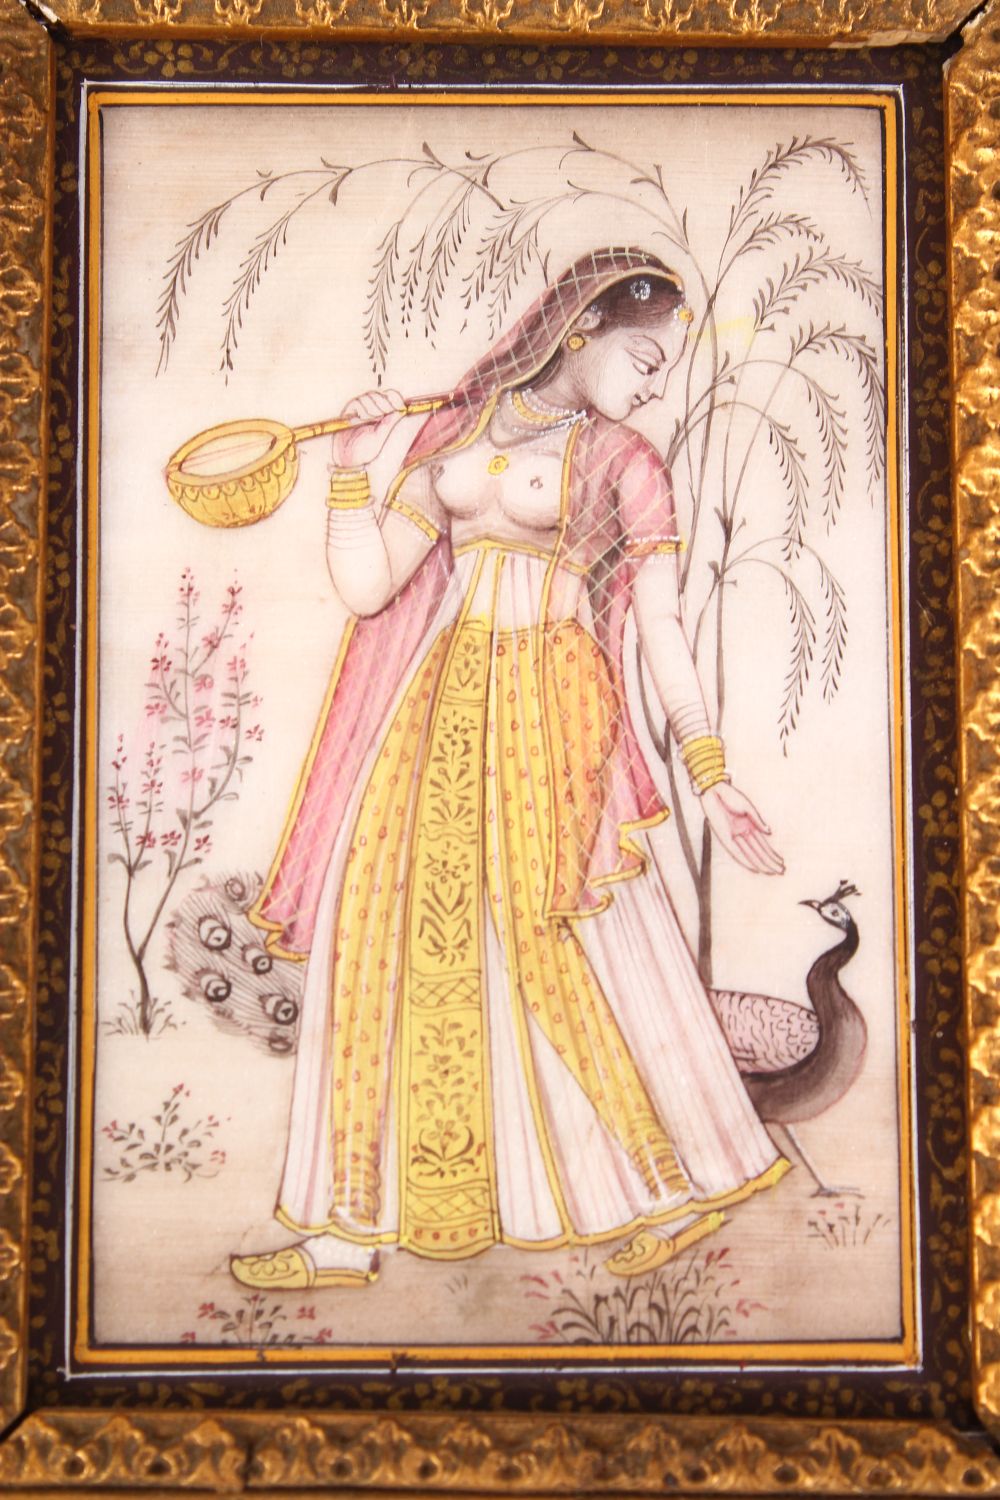 INDIAN SCHOOL, A FEMALE FIGURE HOLDING A MAGICAL INSTRUMENT, A PEACOCK BY HER SIDE, painted on a - Image 5 of 6